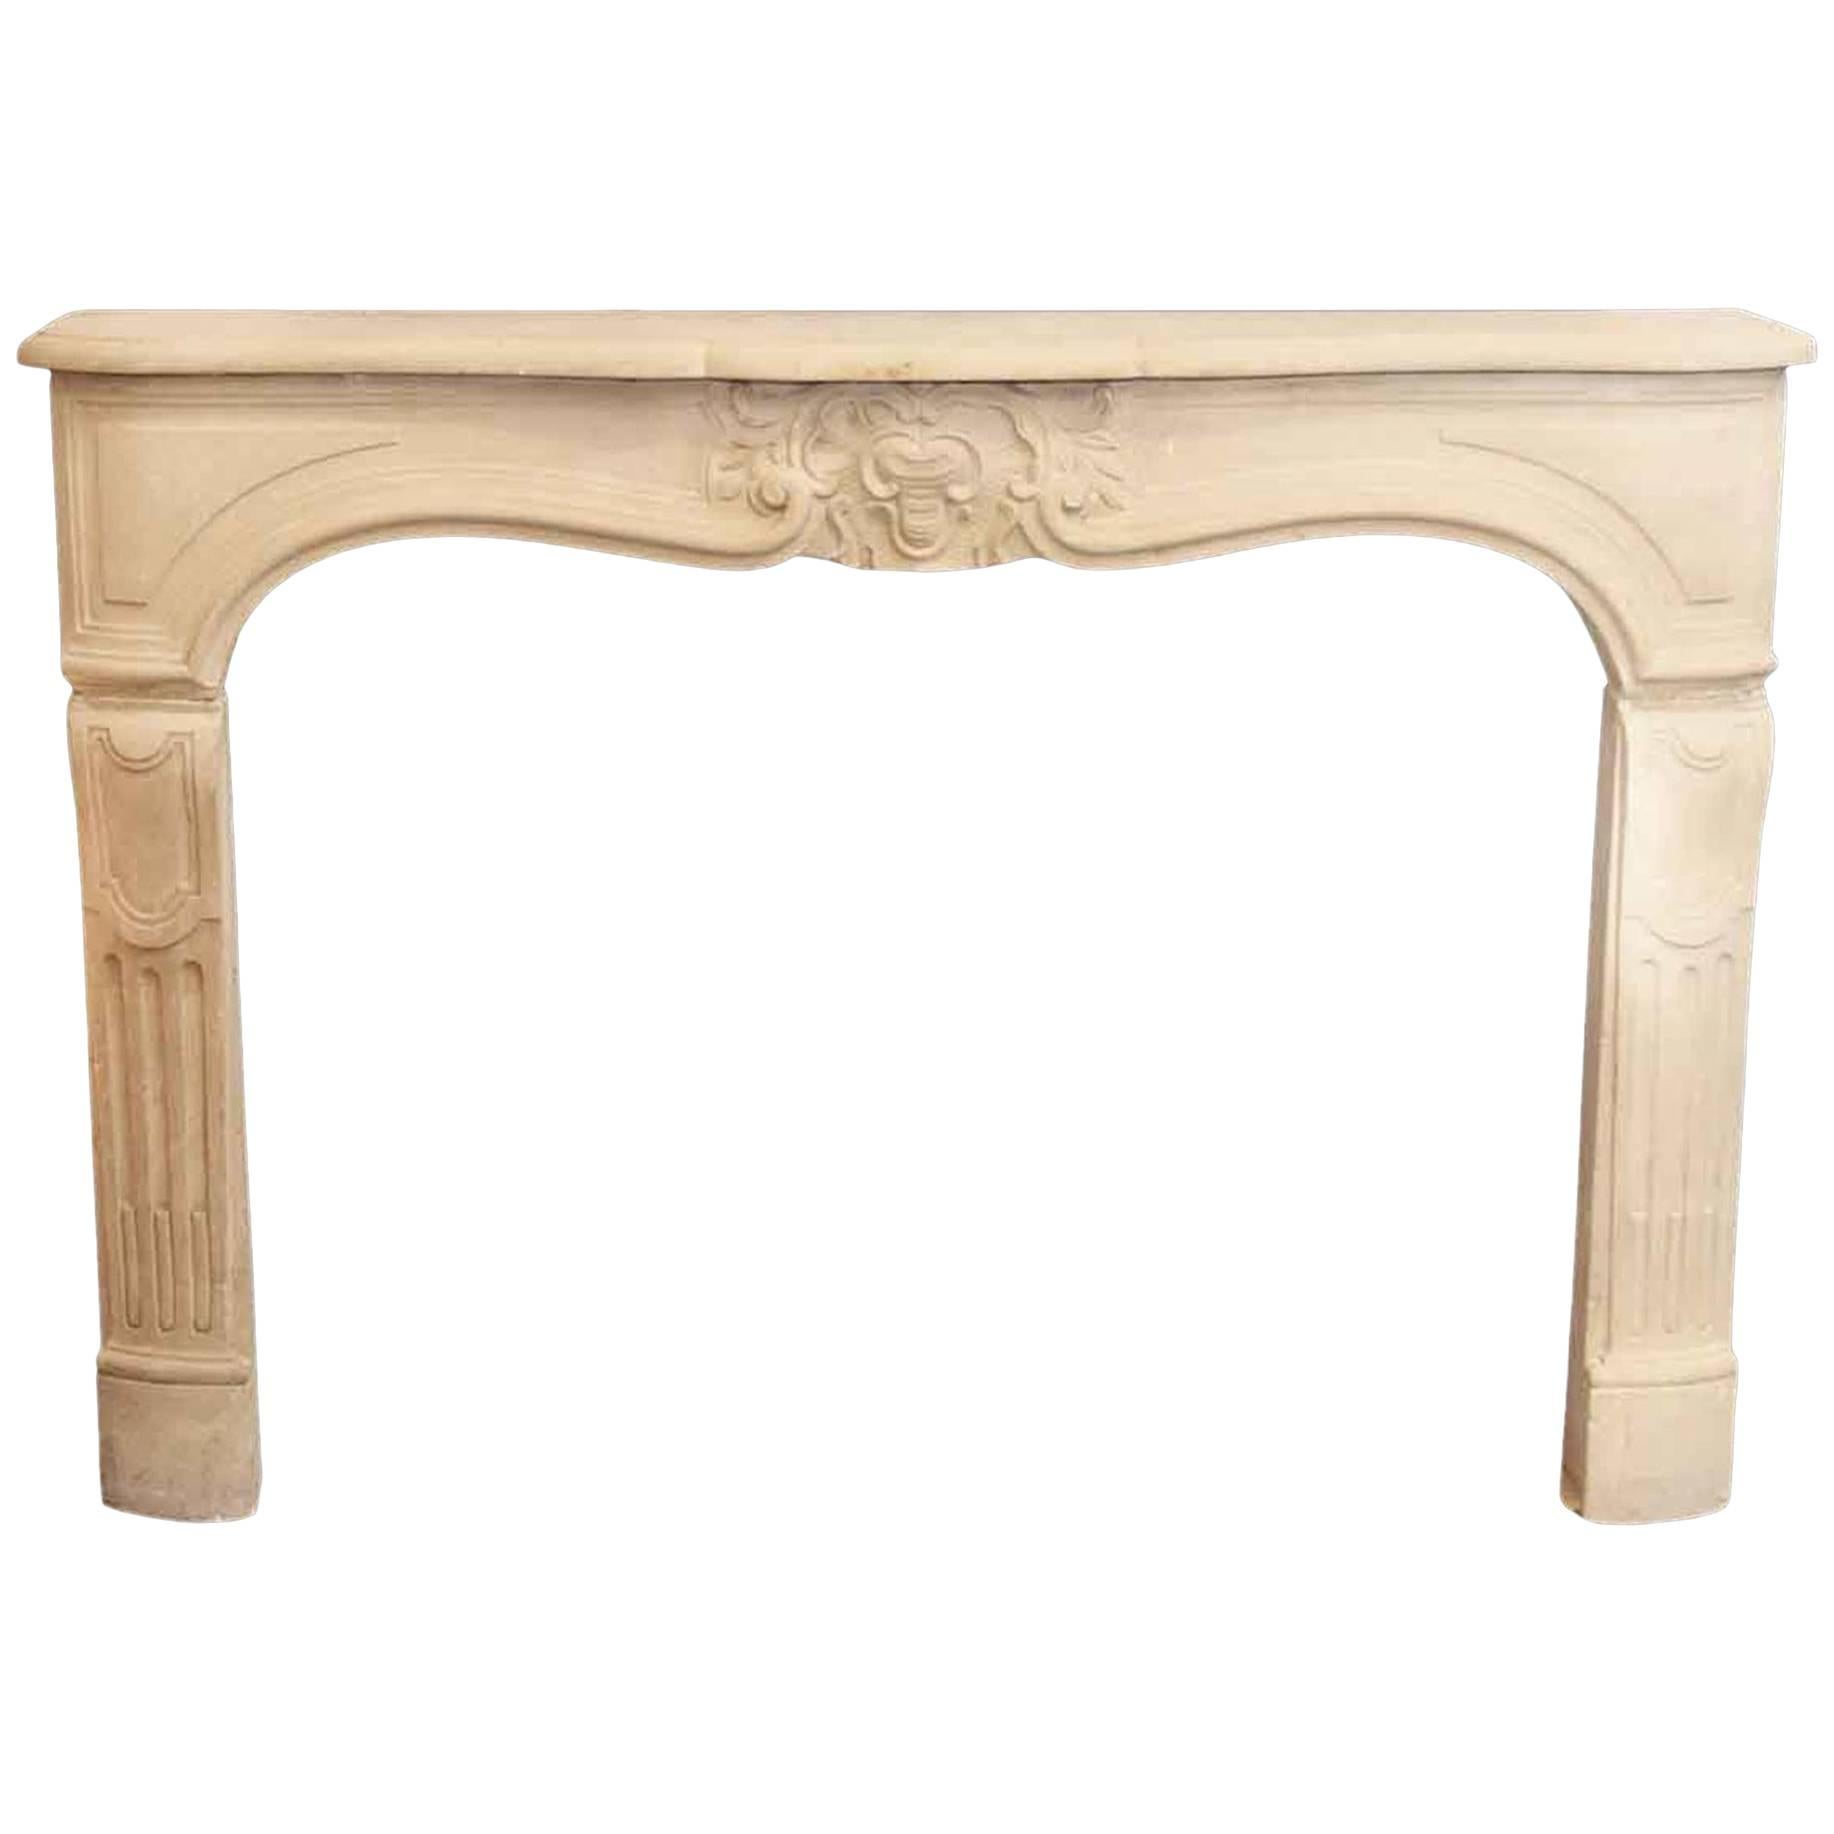 Tan Neoclassical Style Limestone Mantel with Carved Details